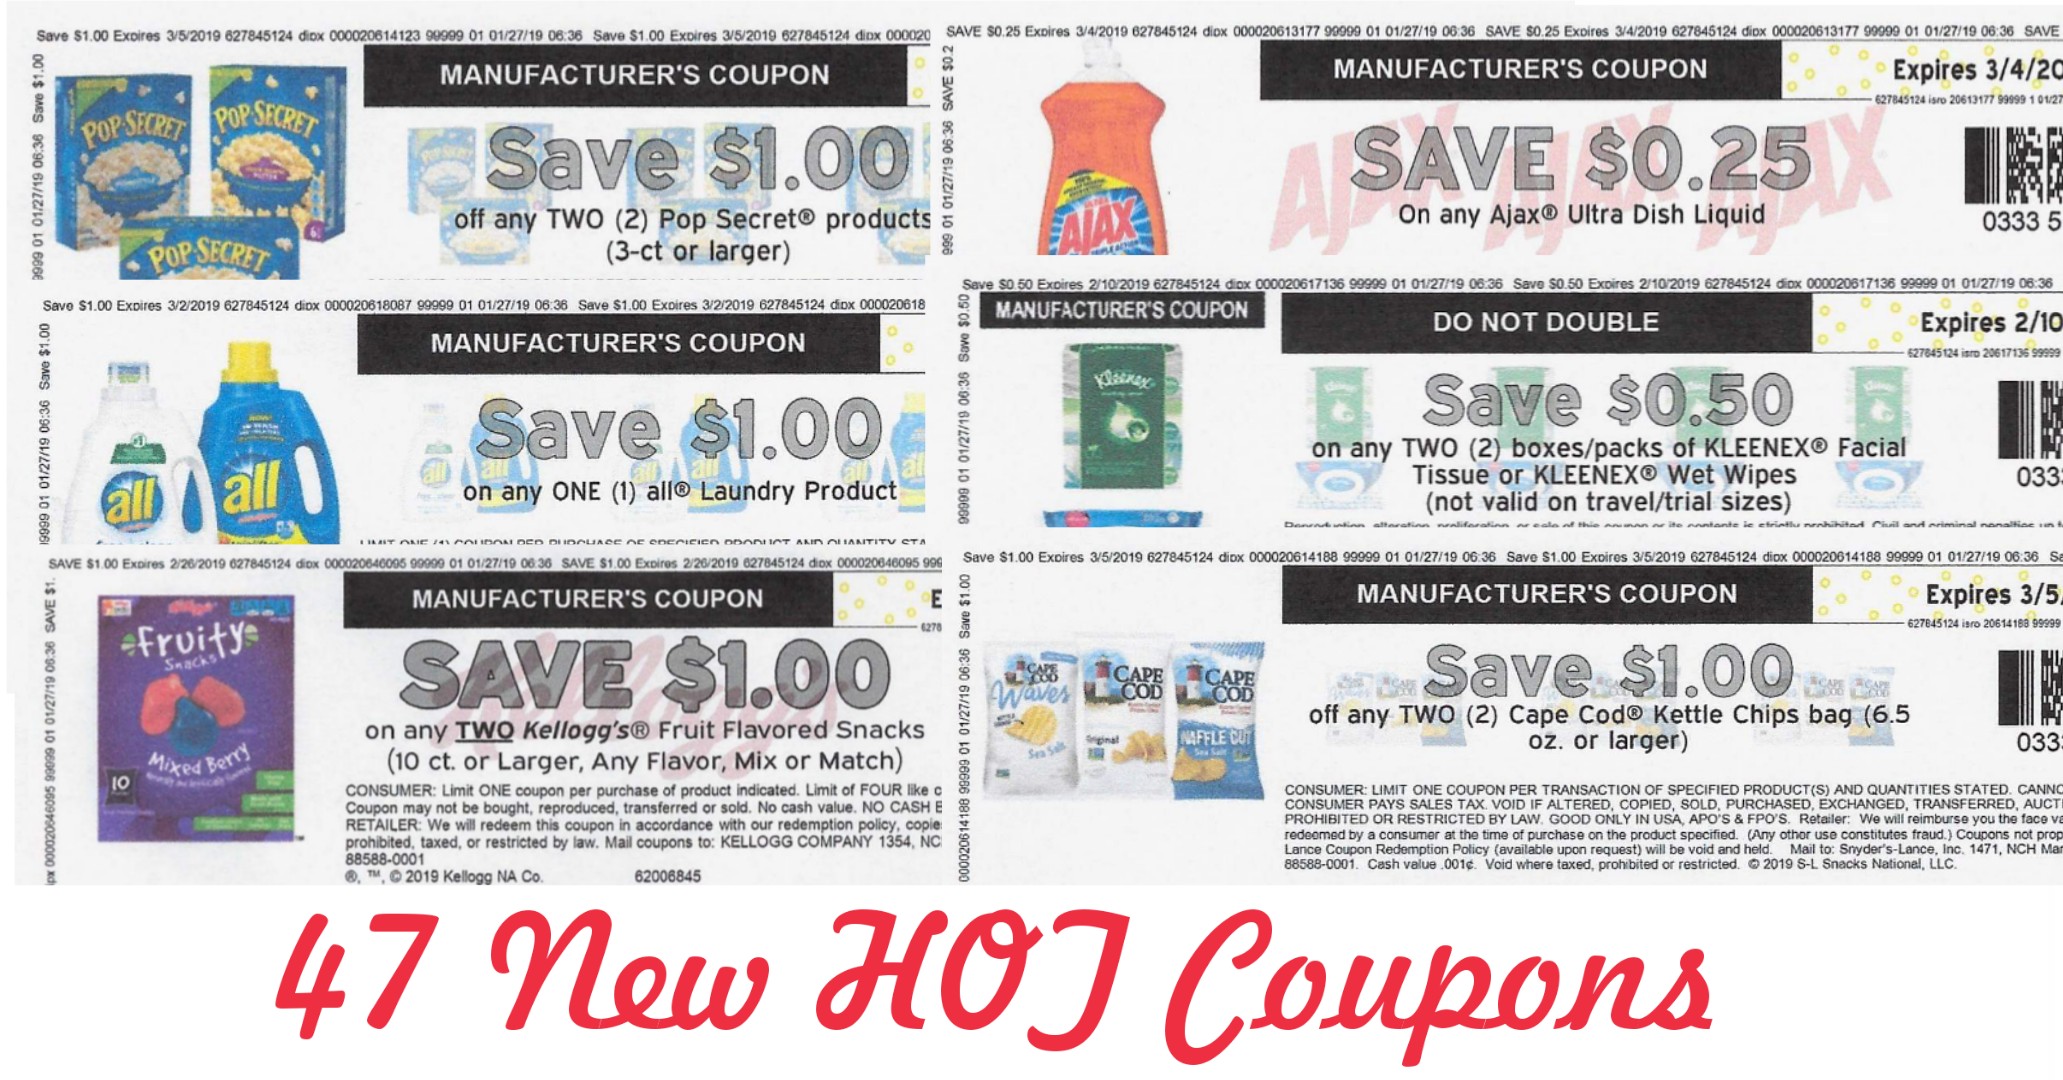 47-new-hot-coupons